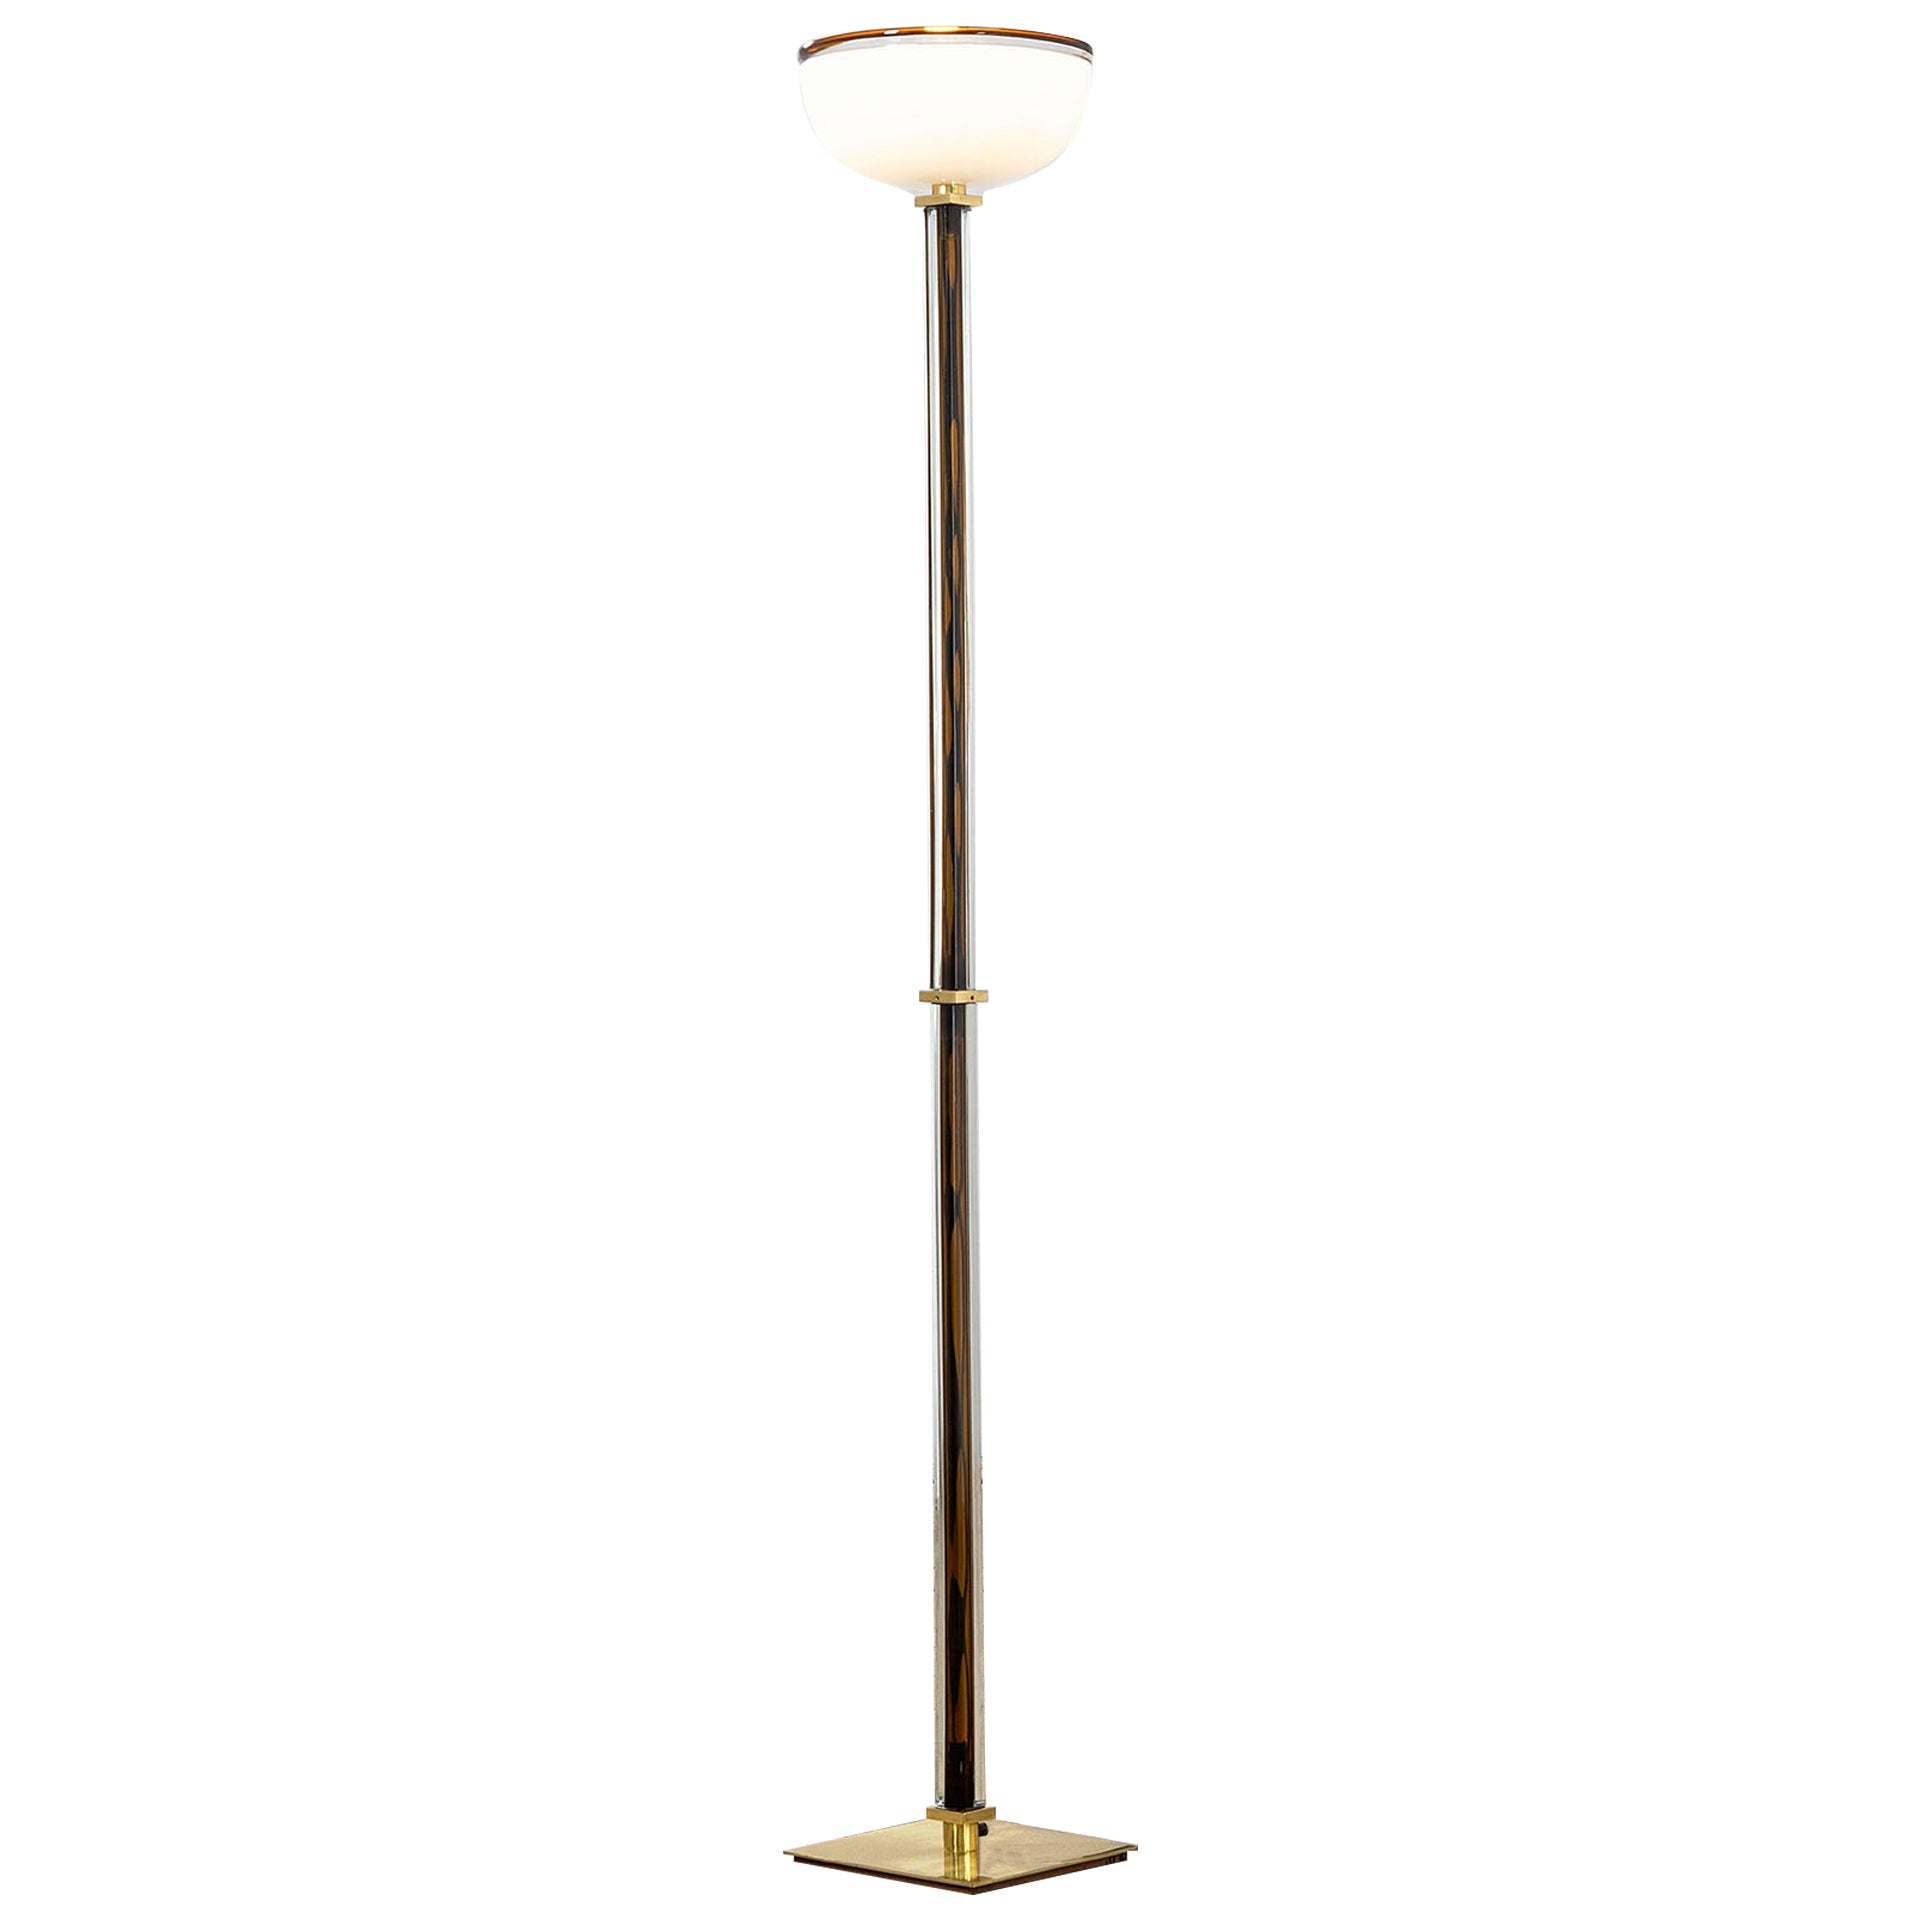 20th Century Venini Floor Lamp Mod. Tolboi in Murano Glass and Metal, 80s For Sale